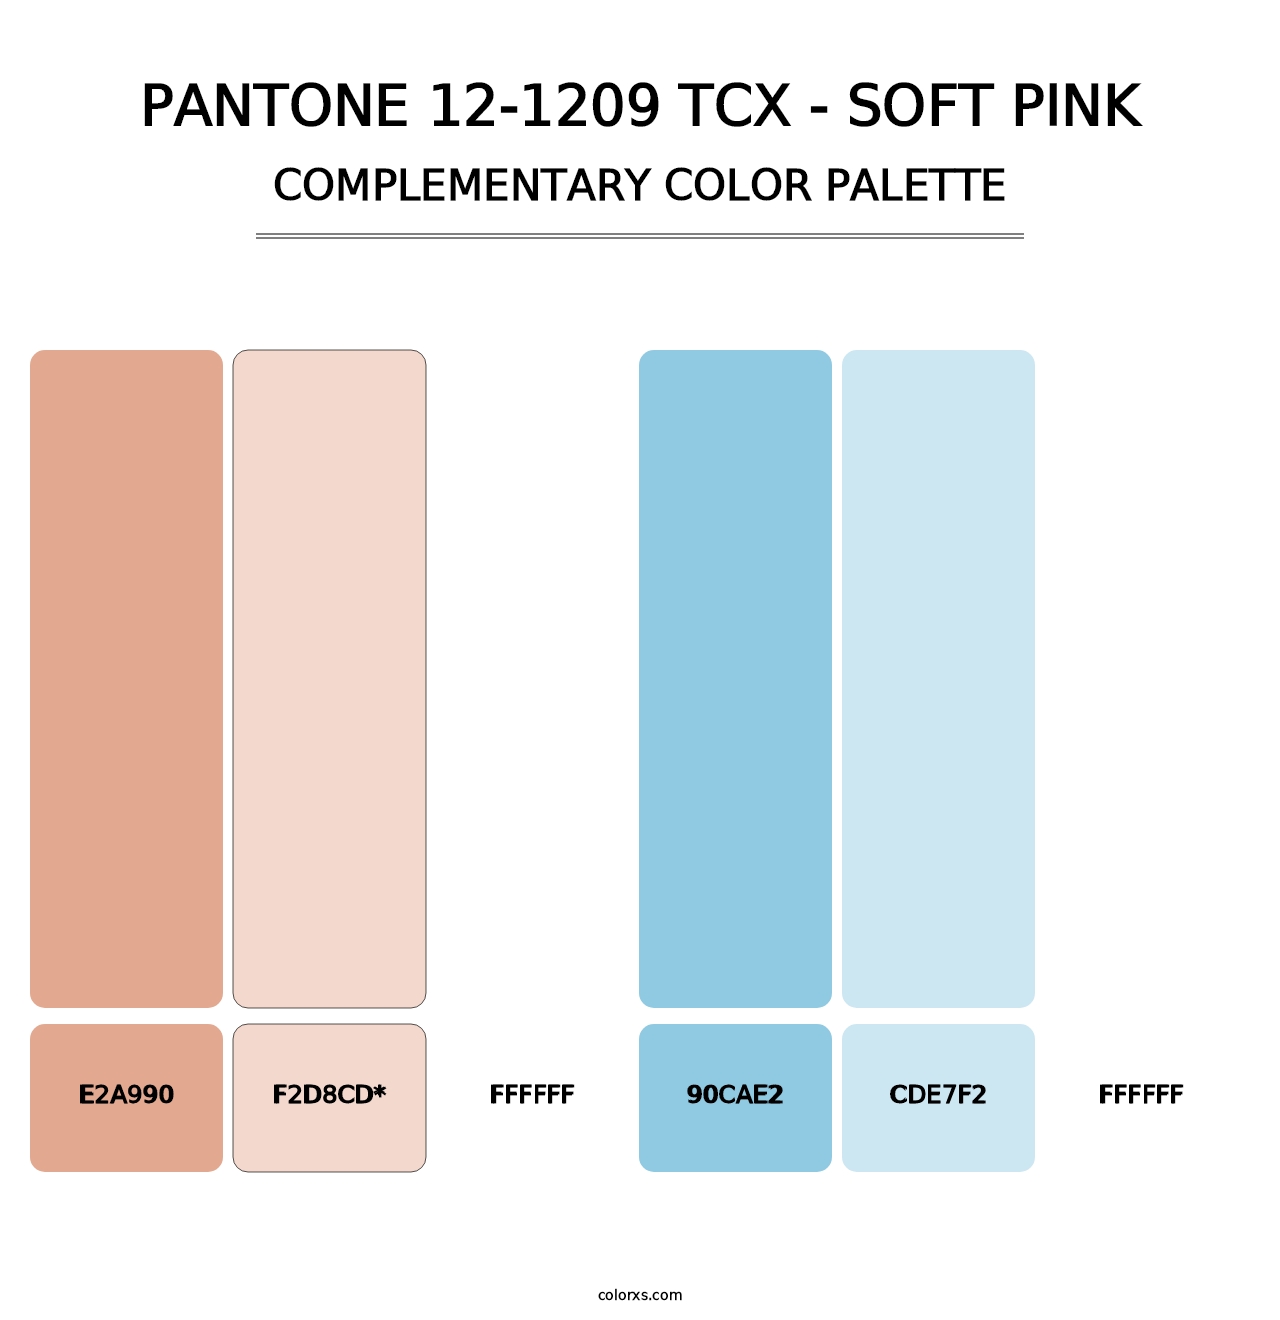 PANTONE 12-1209 TCX - Soft Pink - Complementary Color Palette